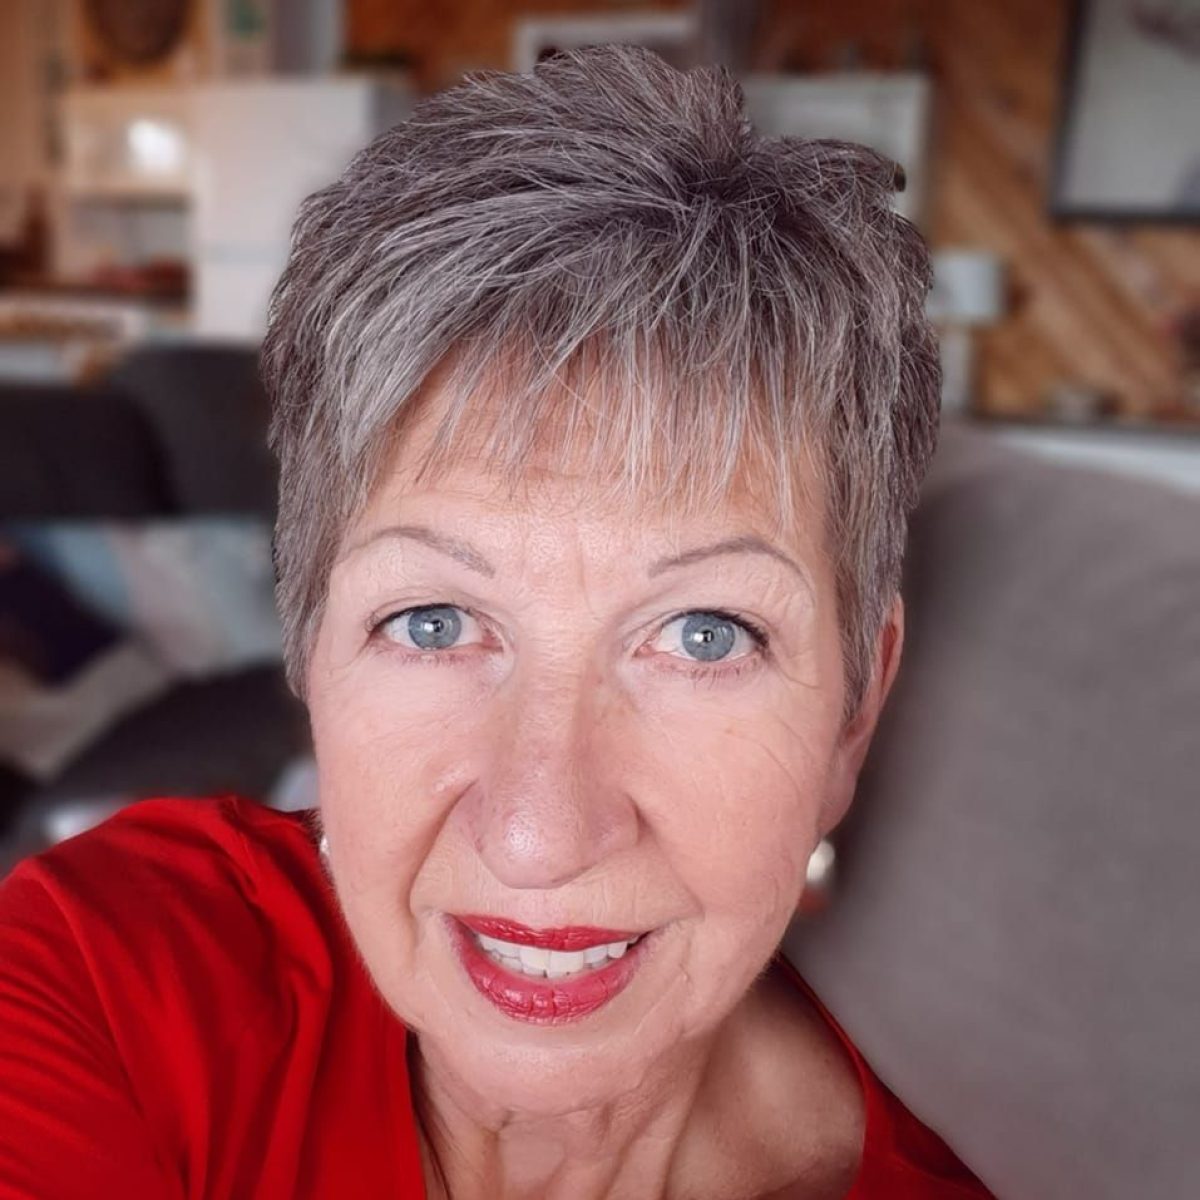 A woman with gray hair in a red shirt.